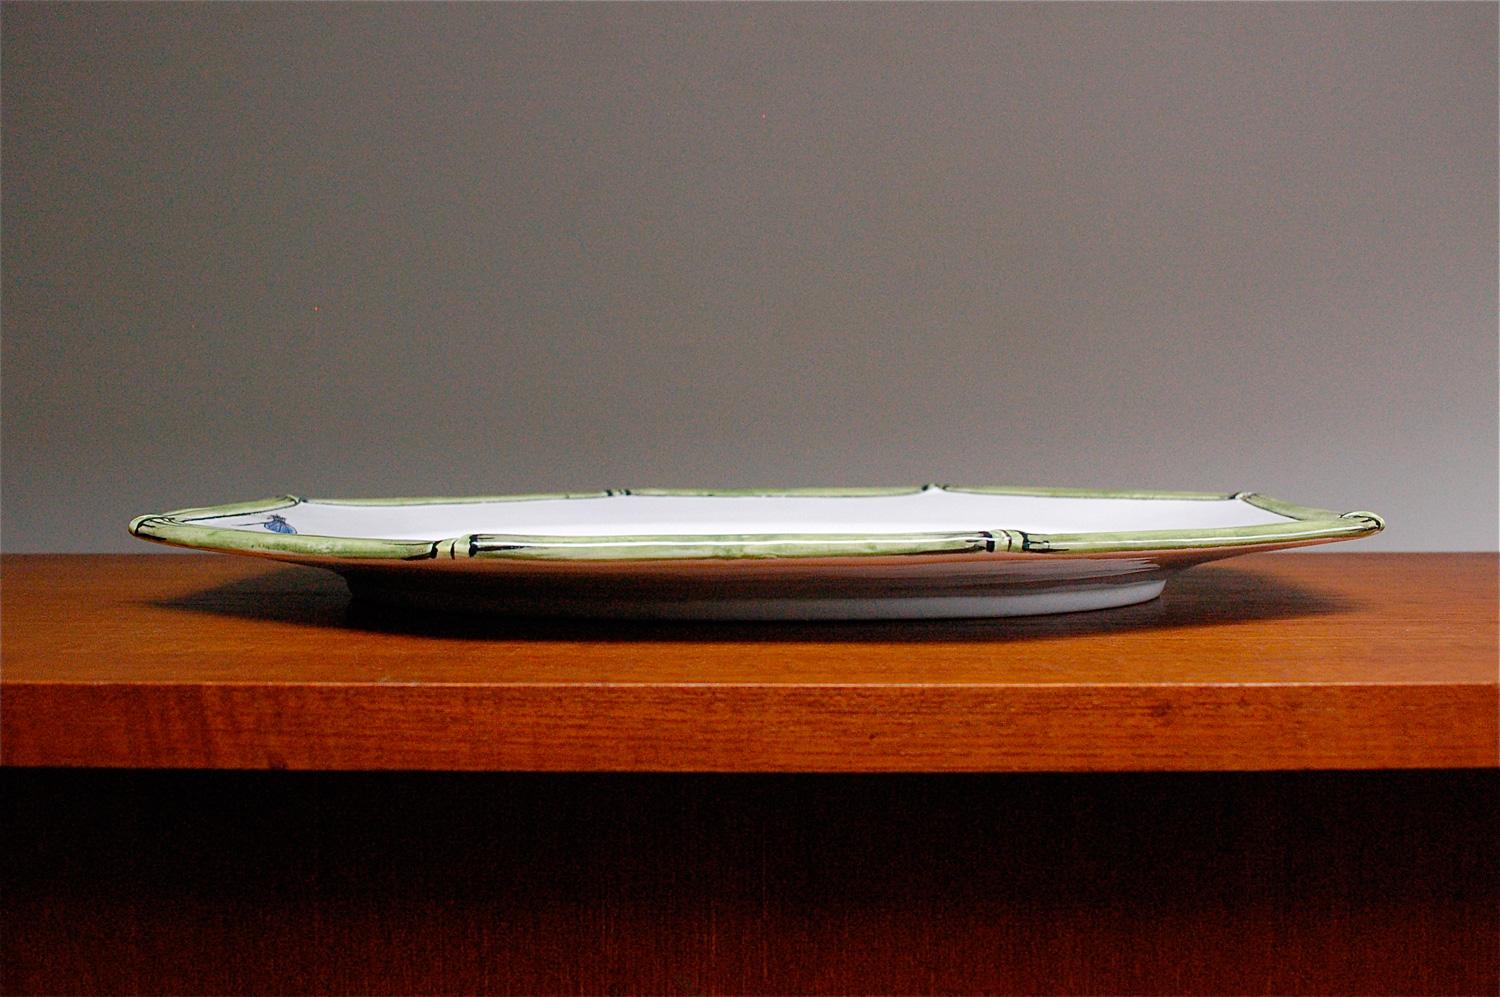 Hand-Painted Vintage COSTA Serving Dish with Bamboo and Dragonfly Decoration, 1970s, Italy For Sale